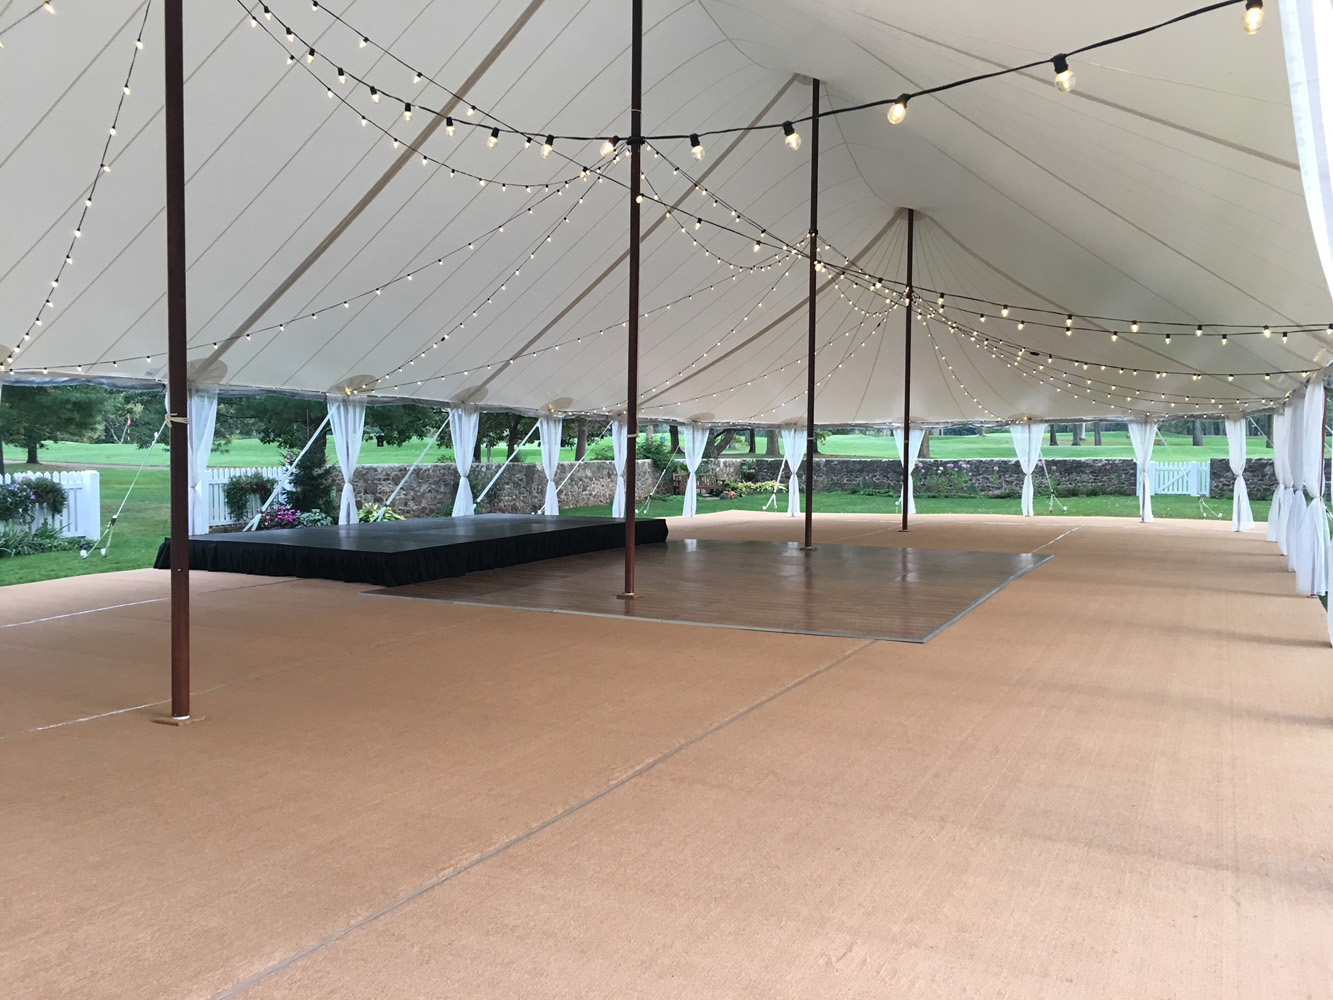 Nj Tent Rental With Dance Floor : We strive to provide everything you